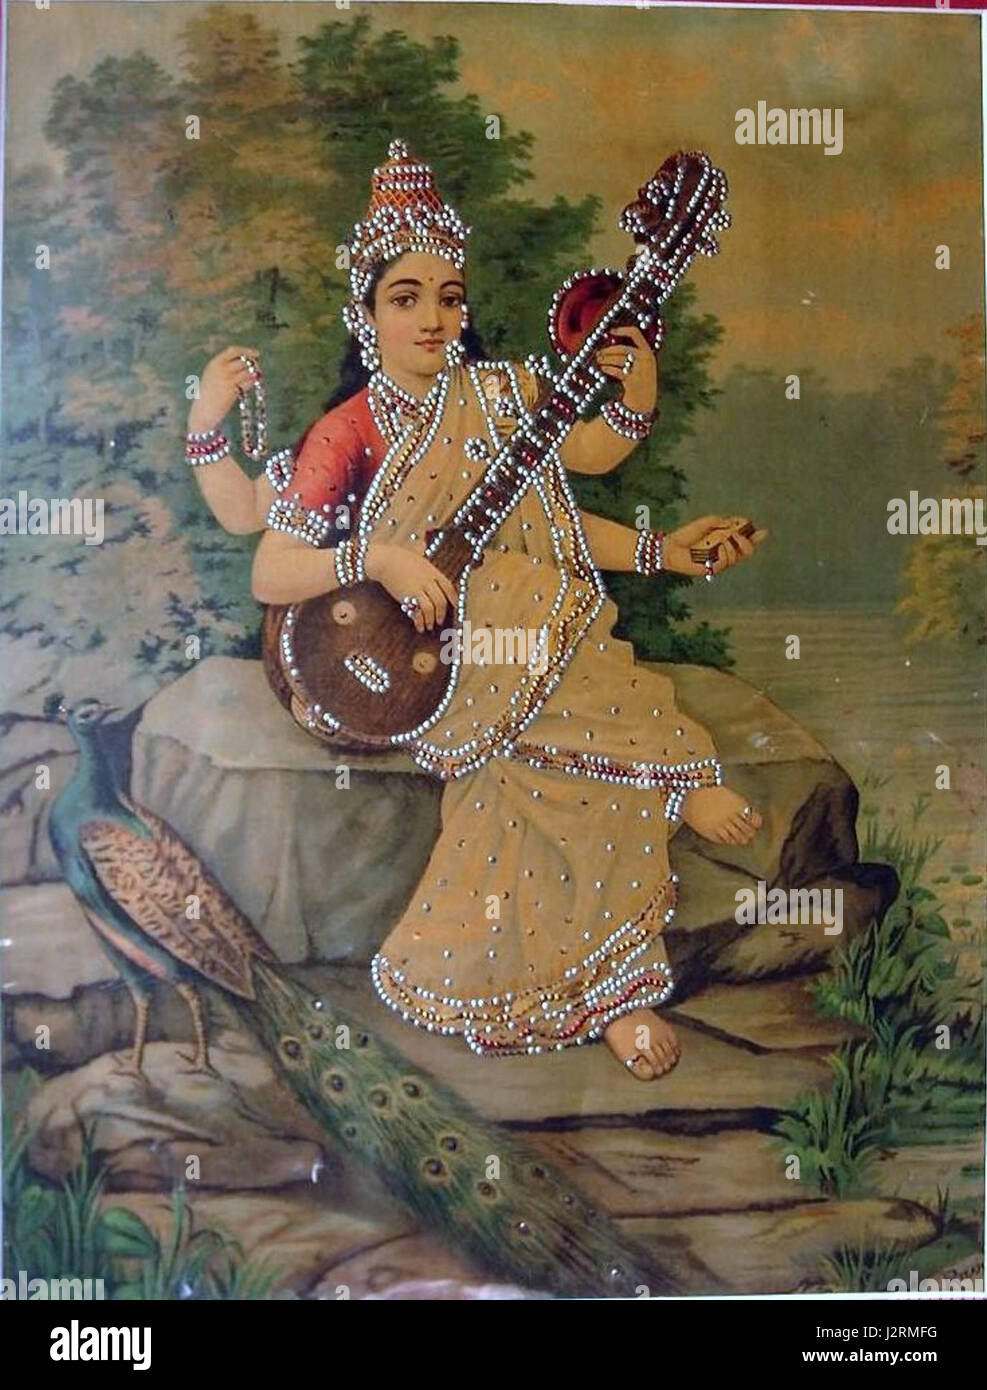 A vision of Sarasvati from the Ravi Varma studio, c.1910's; decorated with sequins Stock Photo